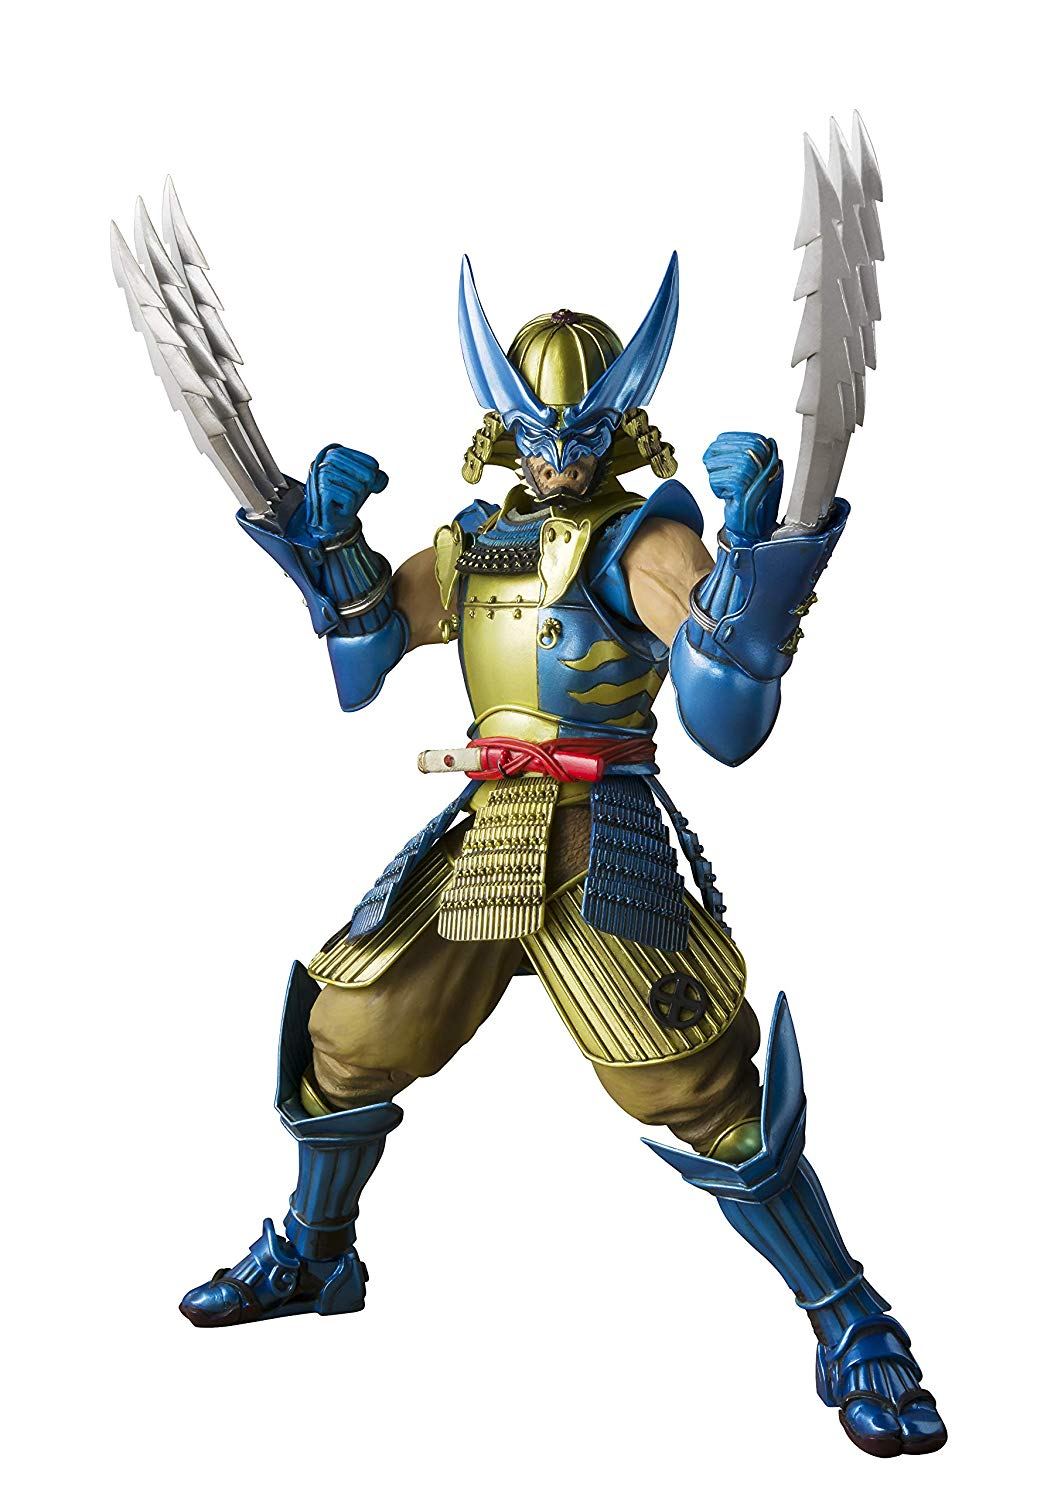 Details about   BANDAI MANGA REALIZATION Outlaw Wolverine Action Figure w/ Tracking NEW 